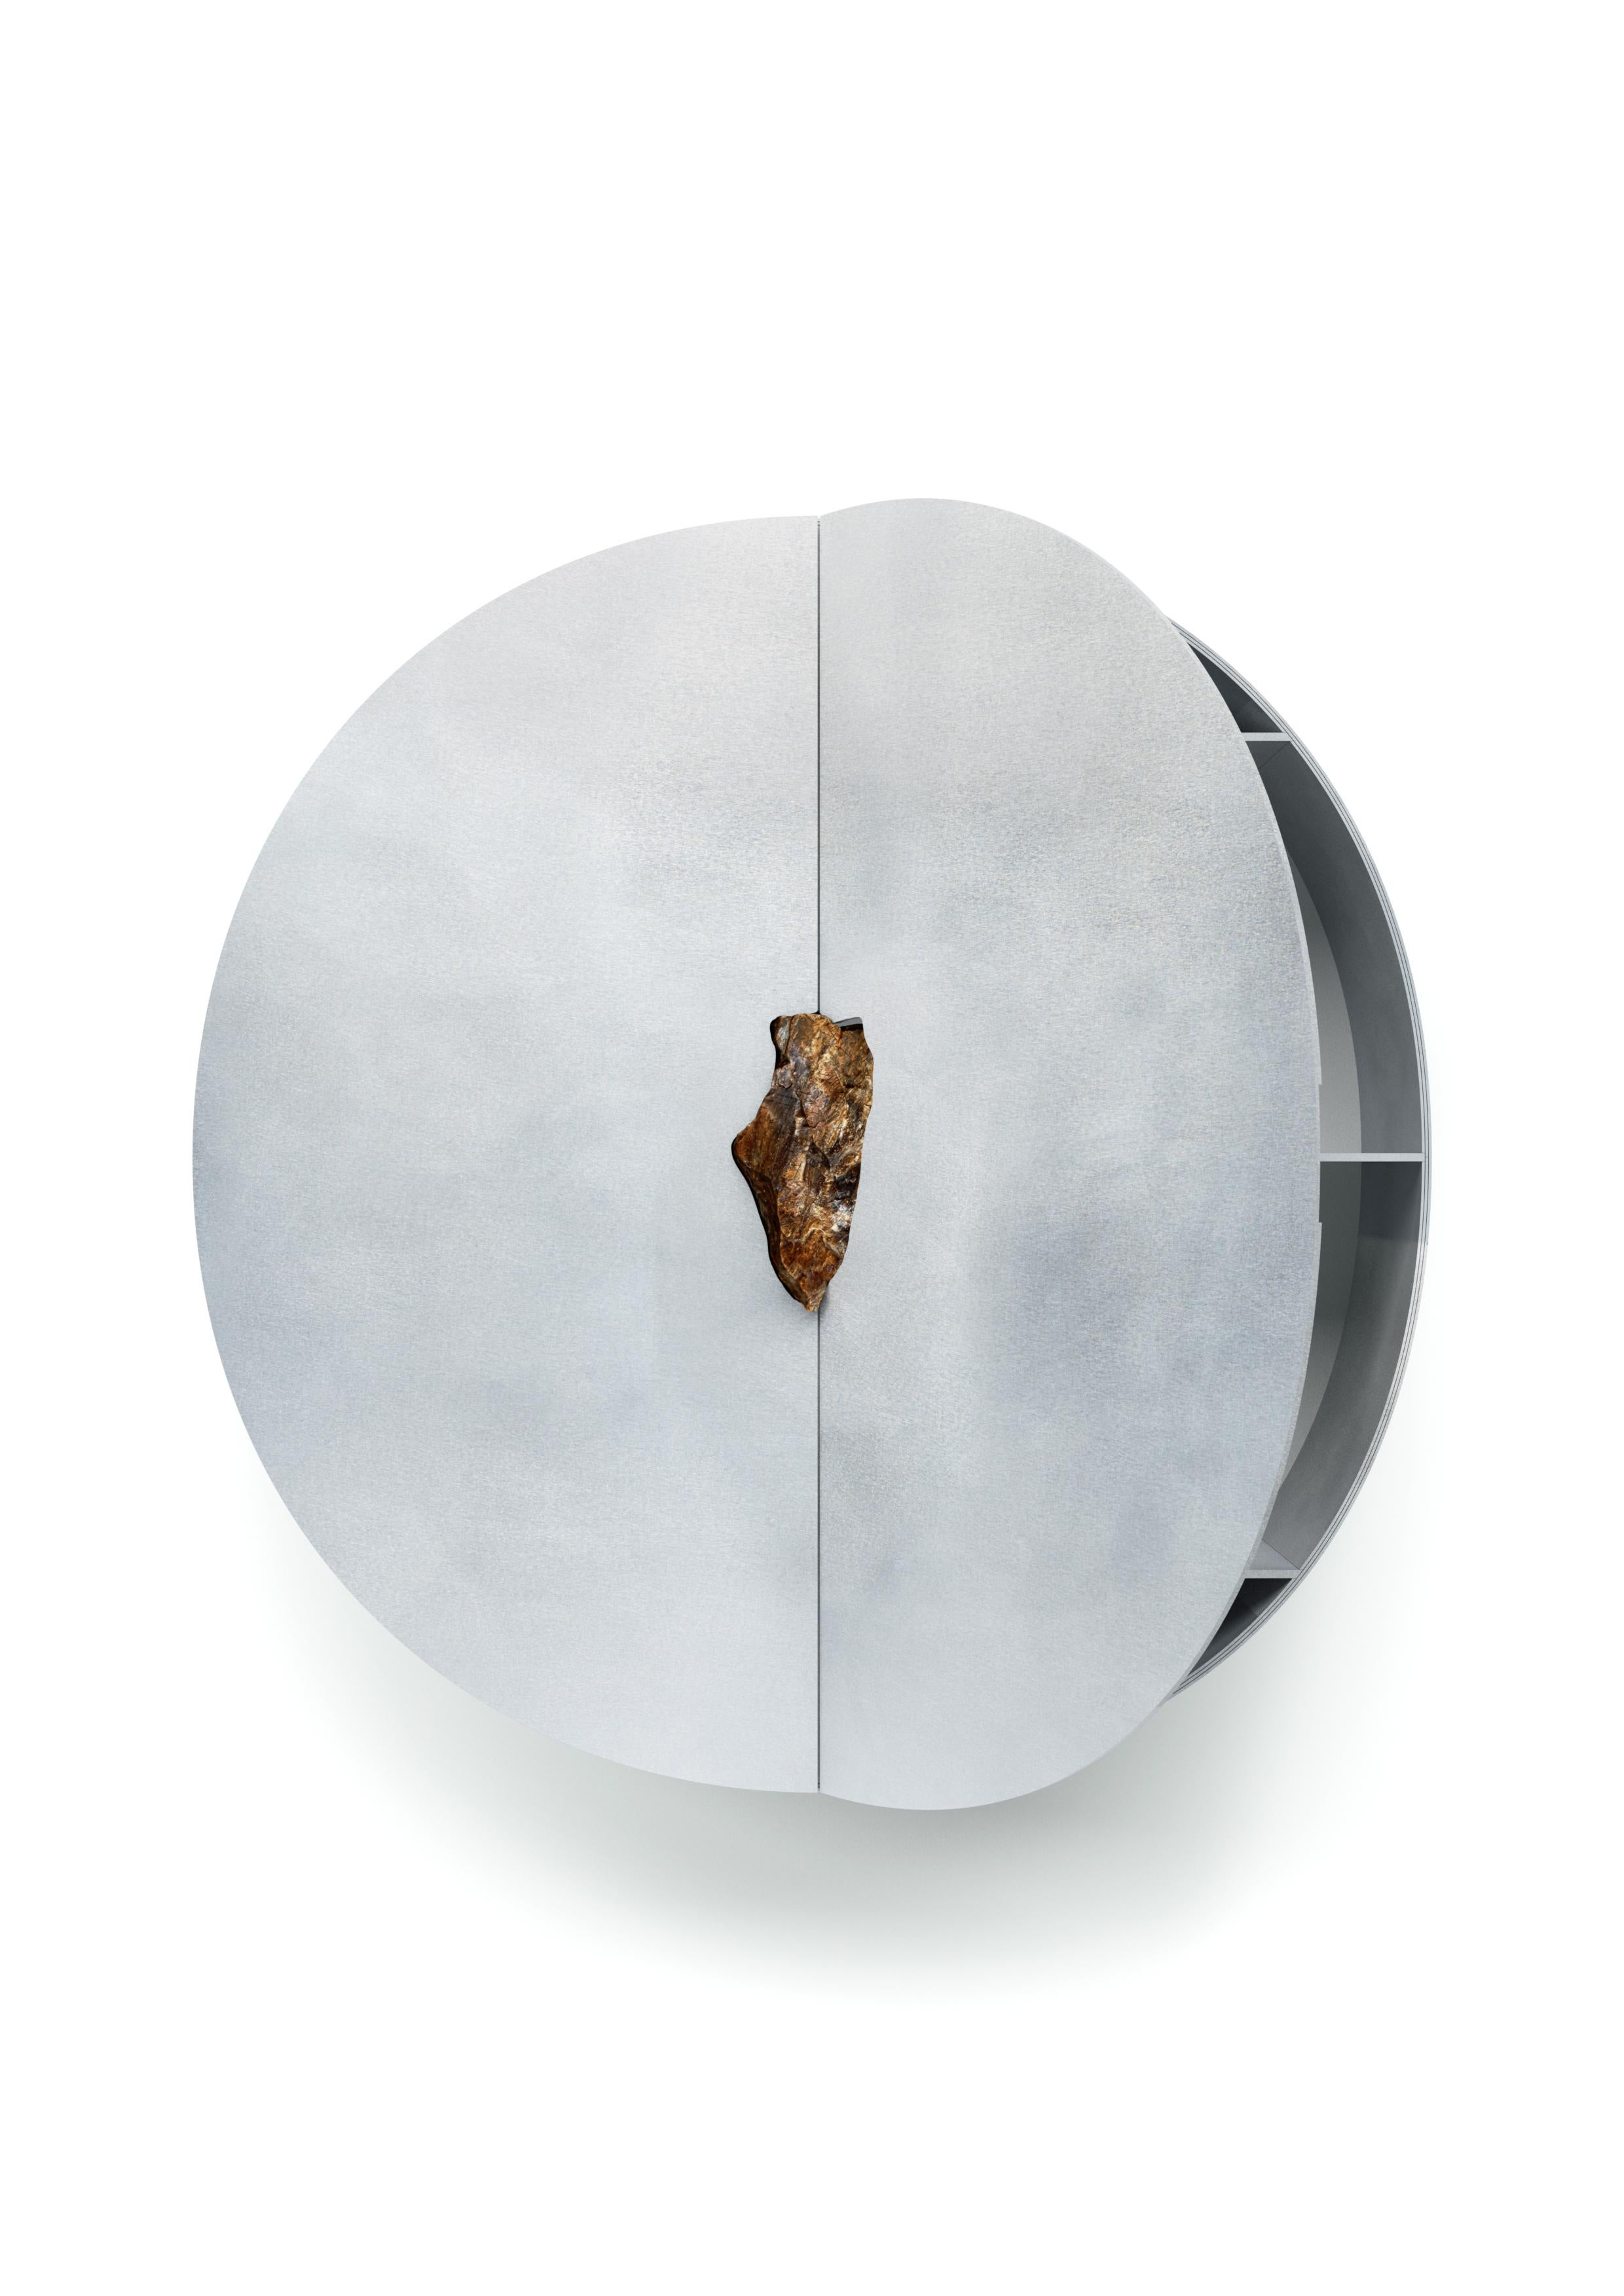 Minimalist Oxidized and Waxed Aluminium Round Cabinet Petrified Wood by Pierre De Valck For Sale